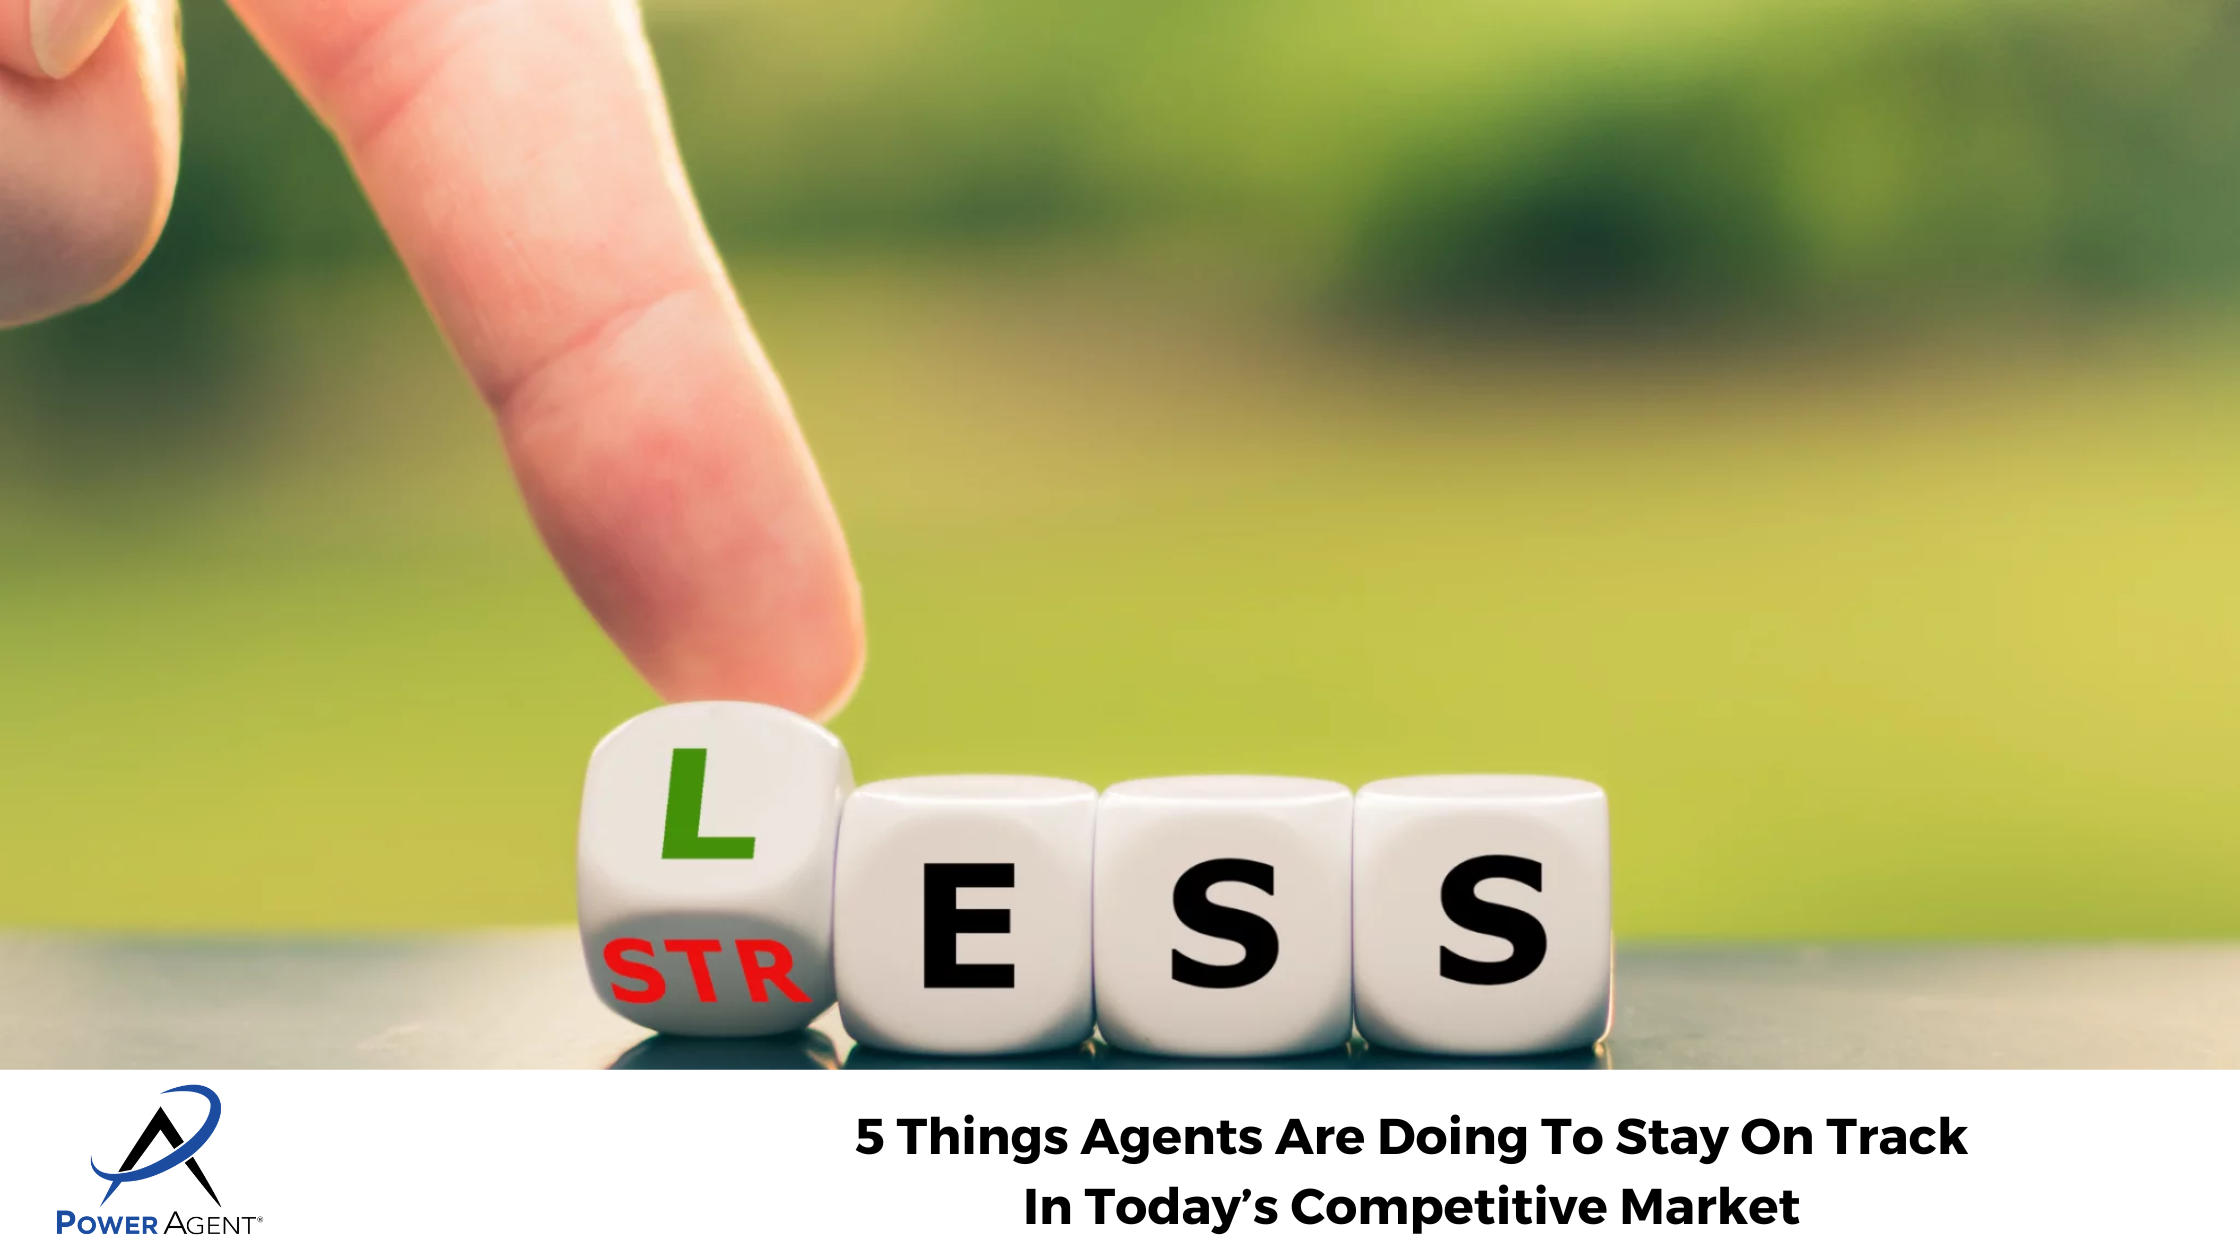 5 Things Agents Are Doing To Stay On Track In Today’s Competitive Market